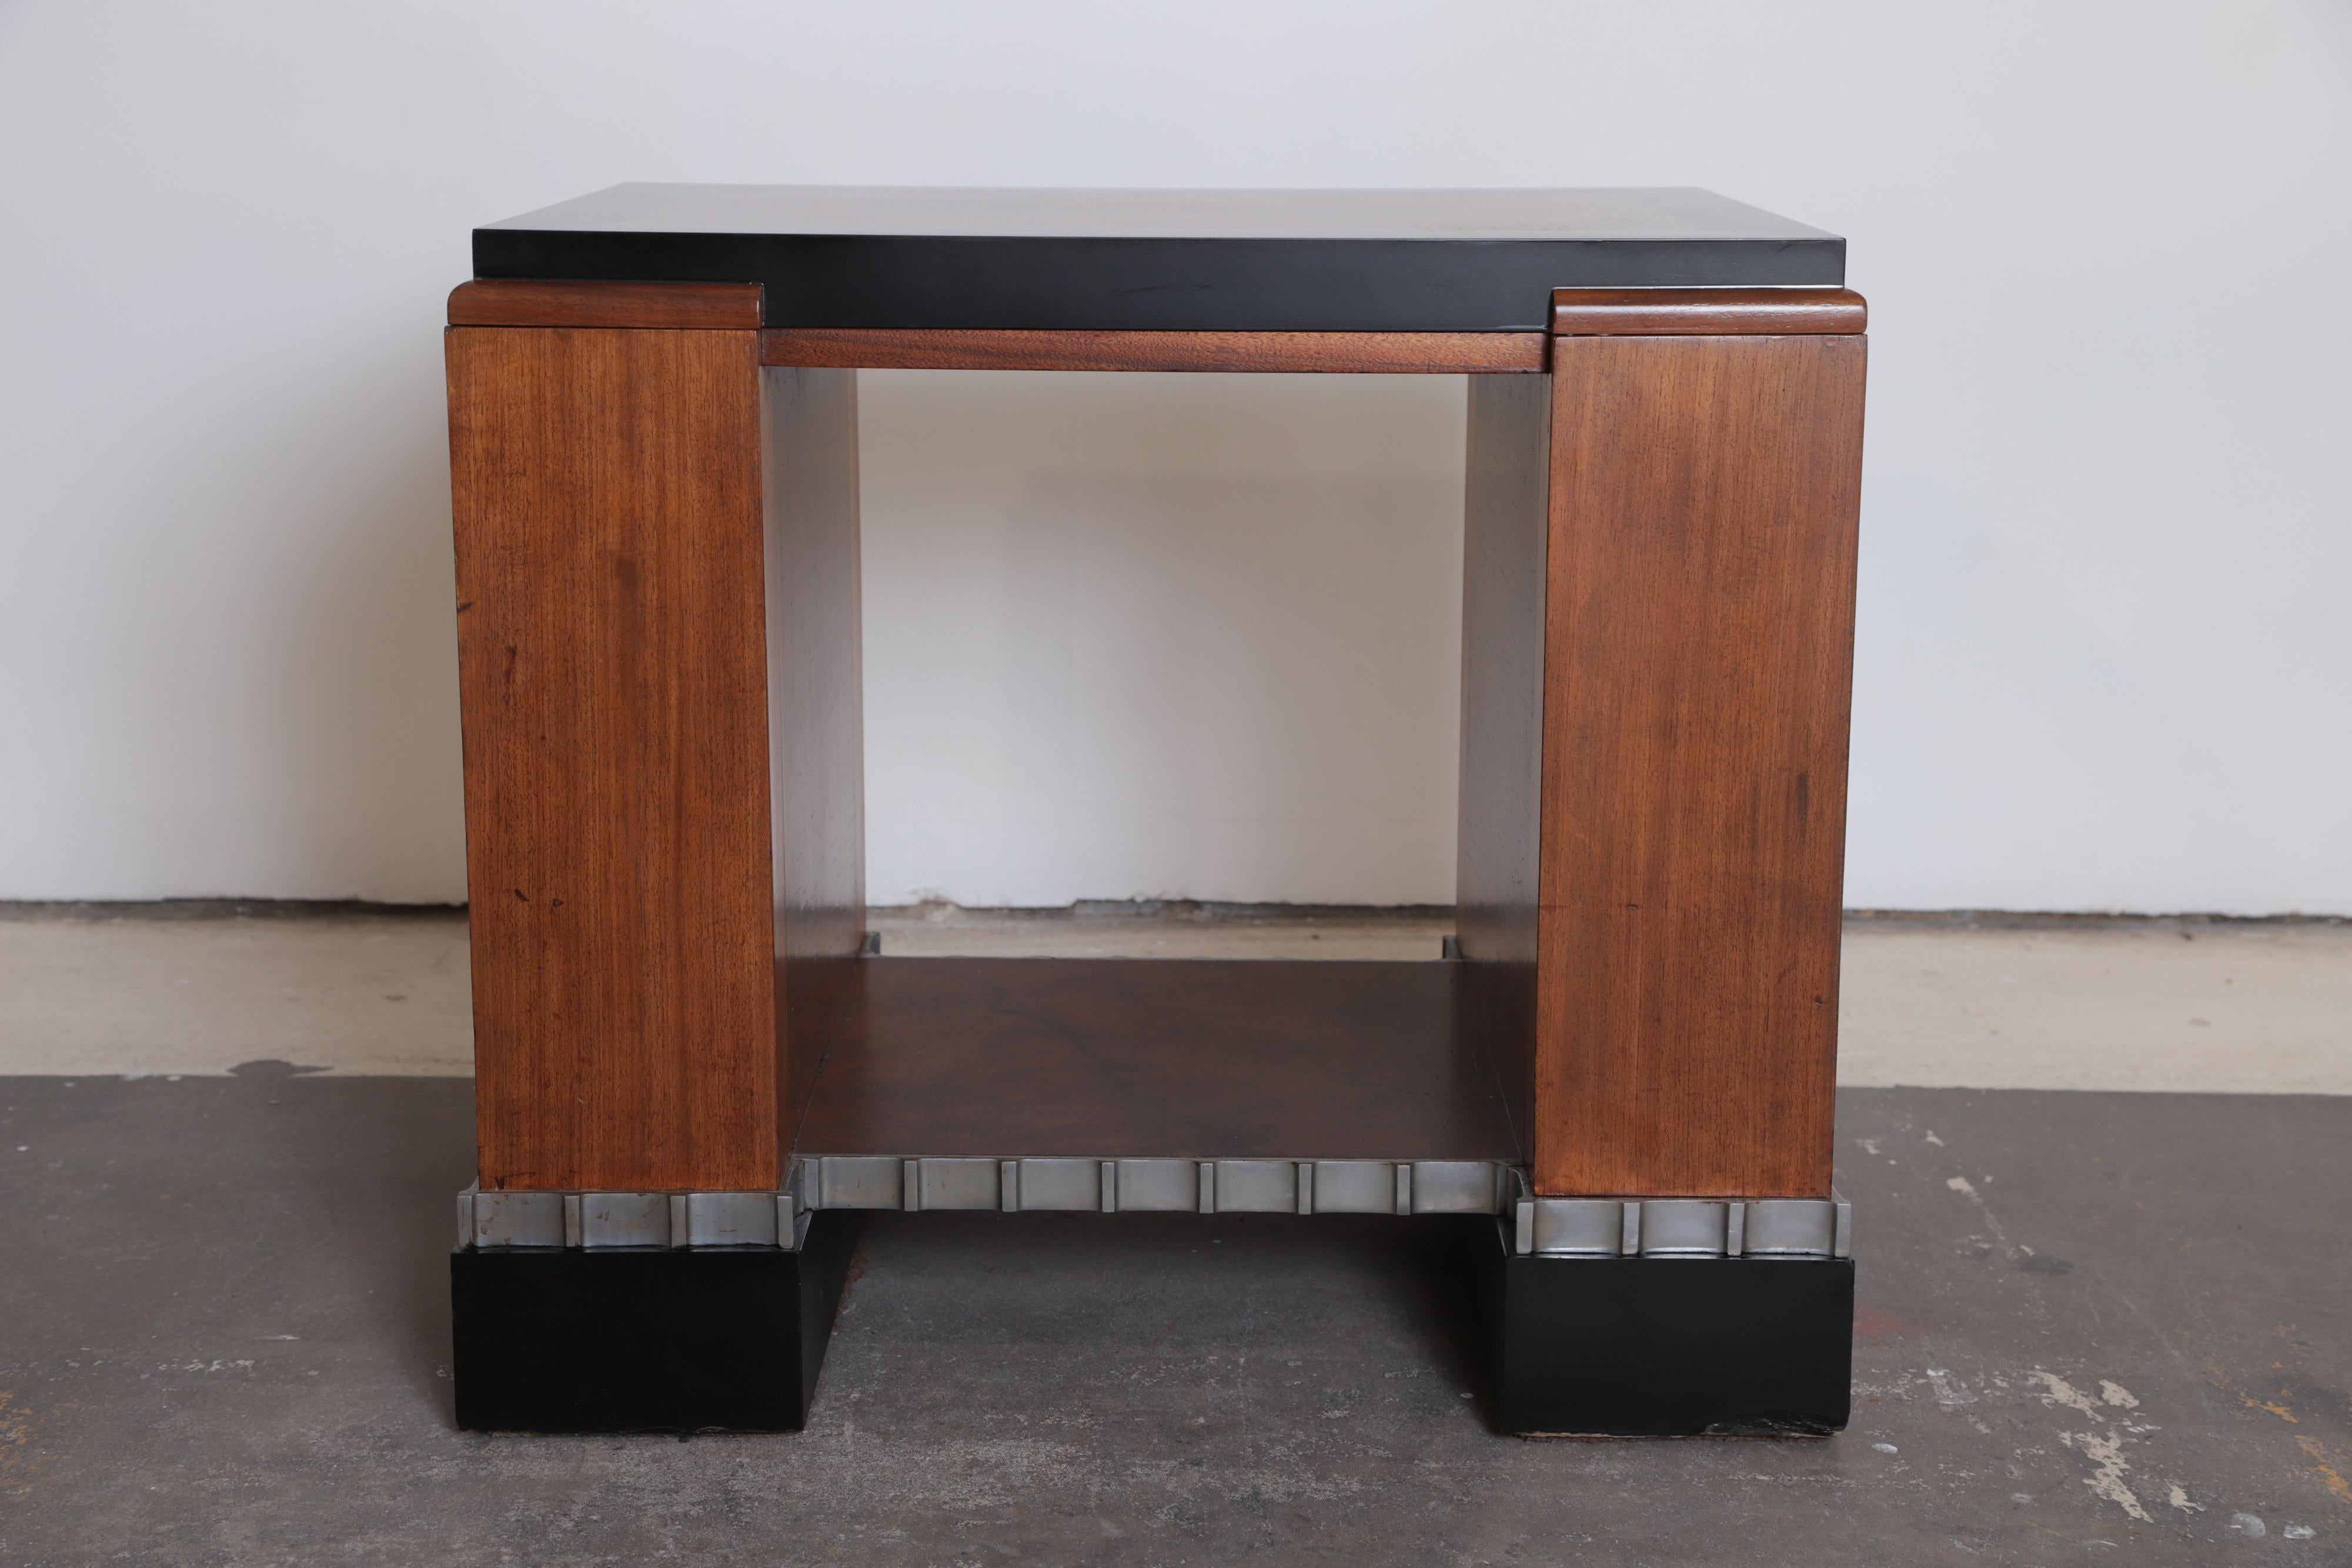 ICONIC Machine Age Art Deco Paul Frankl Skyscraper library occasional table  On Sale from $12,500
Rare and important Modernist table, Metropolitan Life North Building, New York, USA, circa 1927-1929

Bookcase, console, entertainment or end table